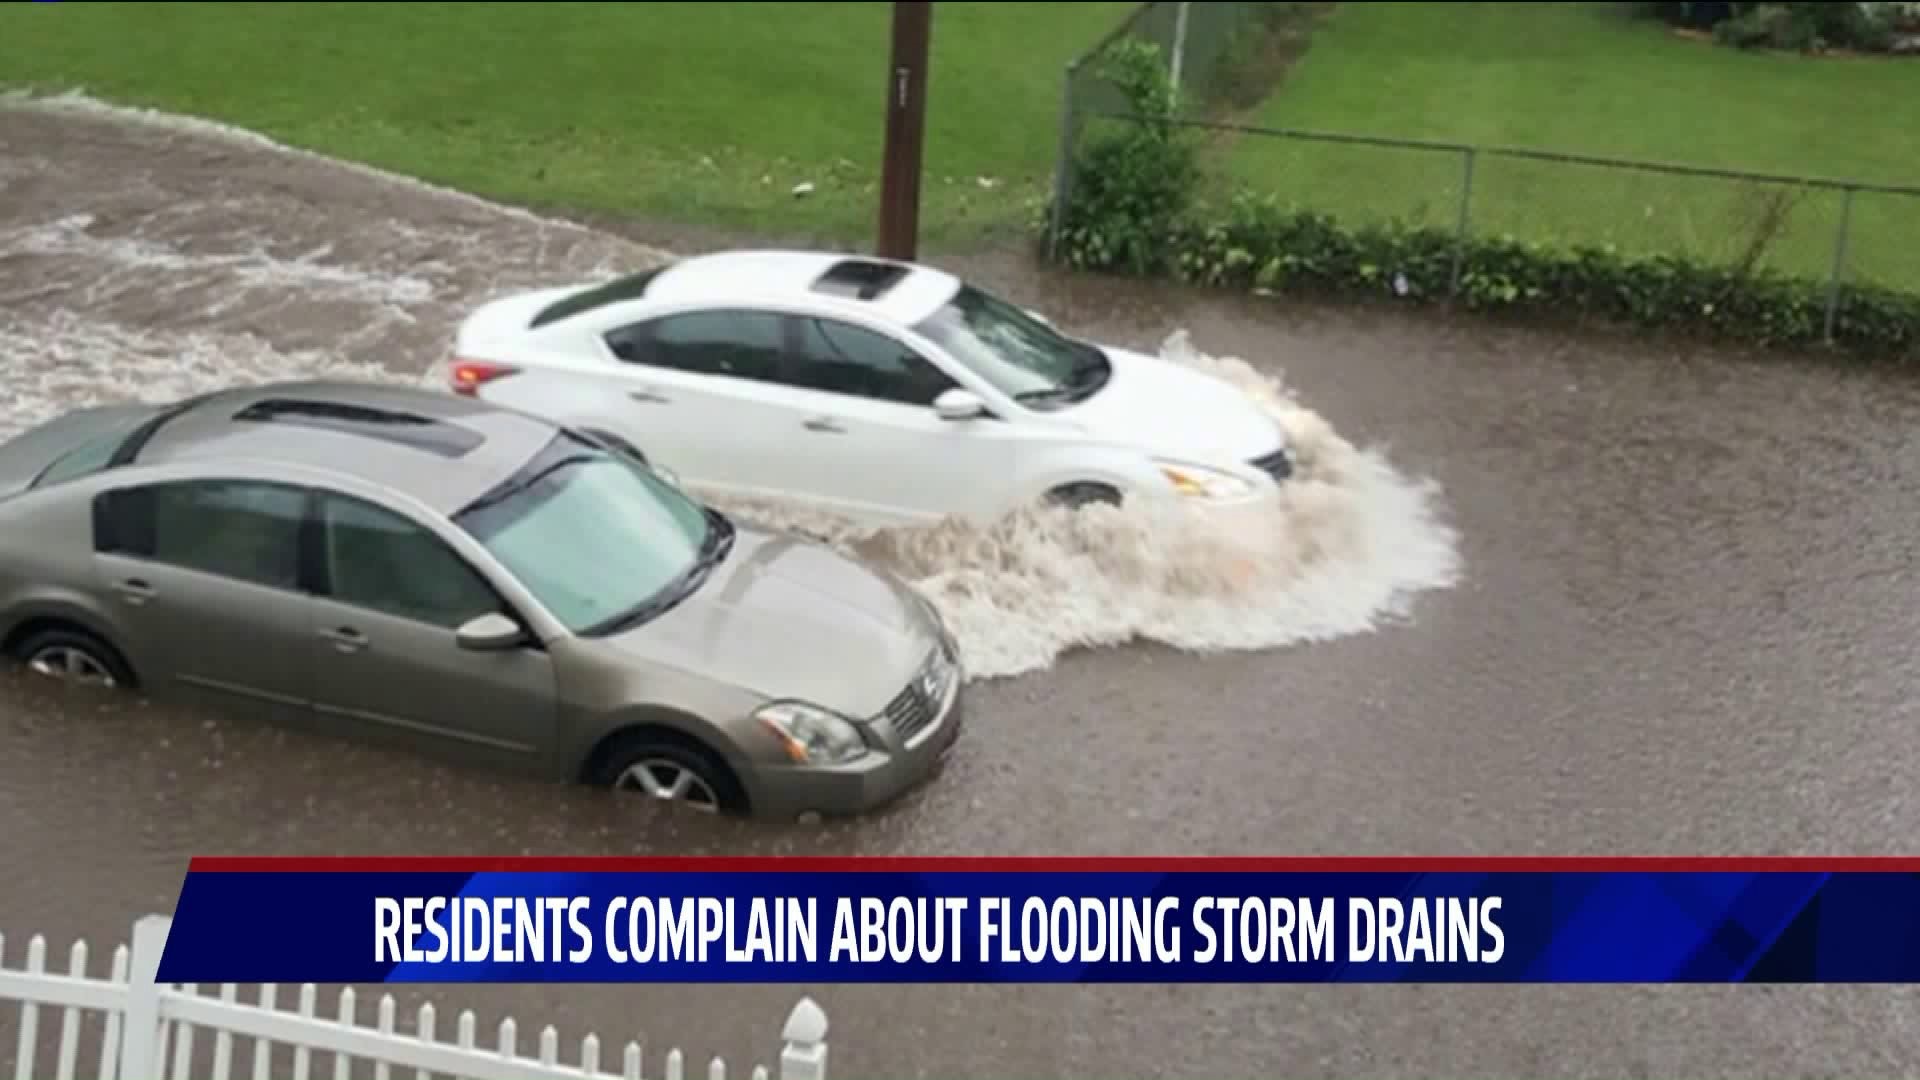 Meriden residents complain about flooding